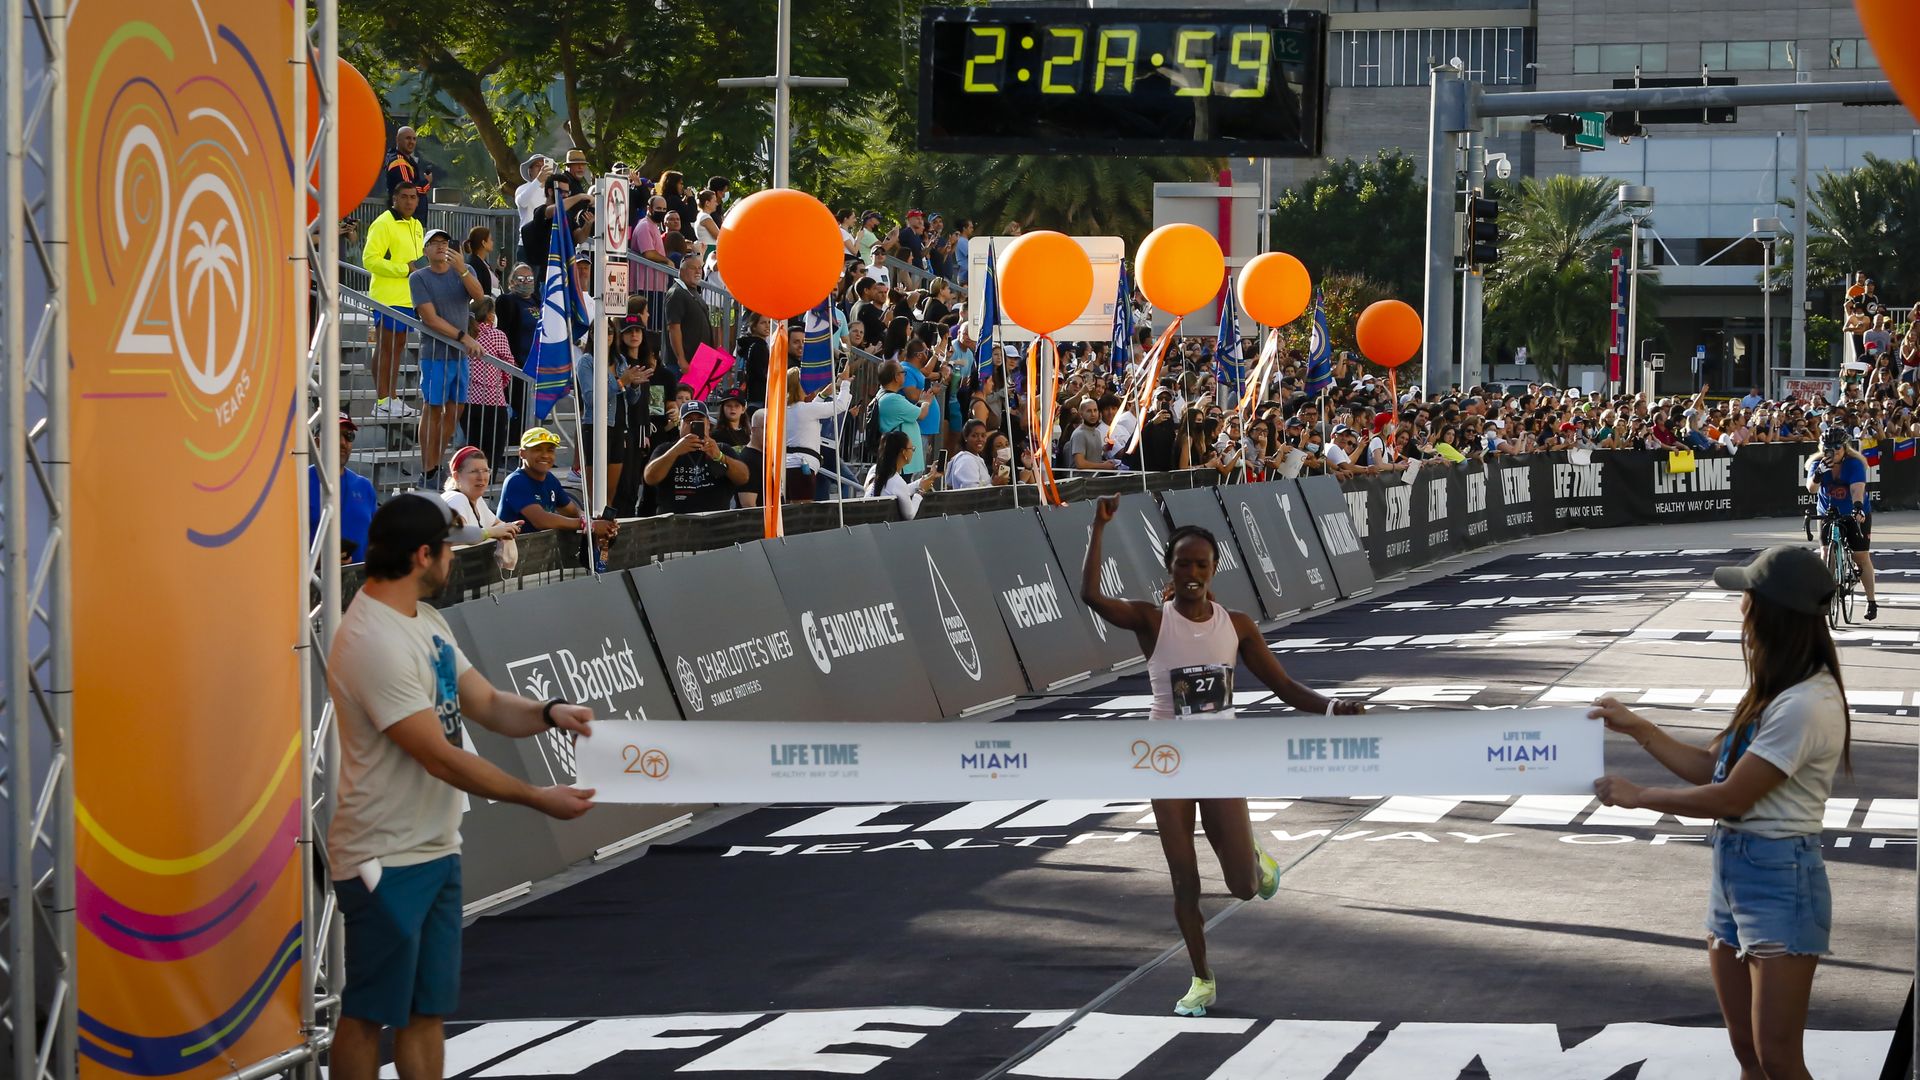 a woman raises her fist triumphantly as she is about to go through a banner to win a marathon 